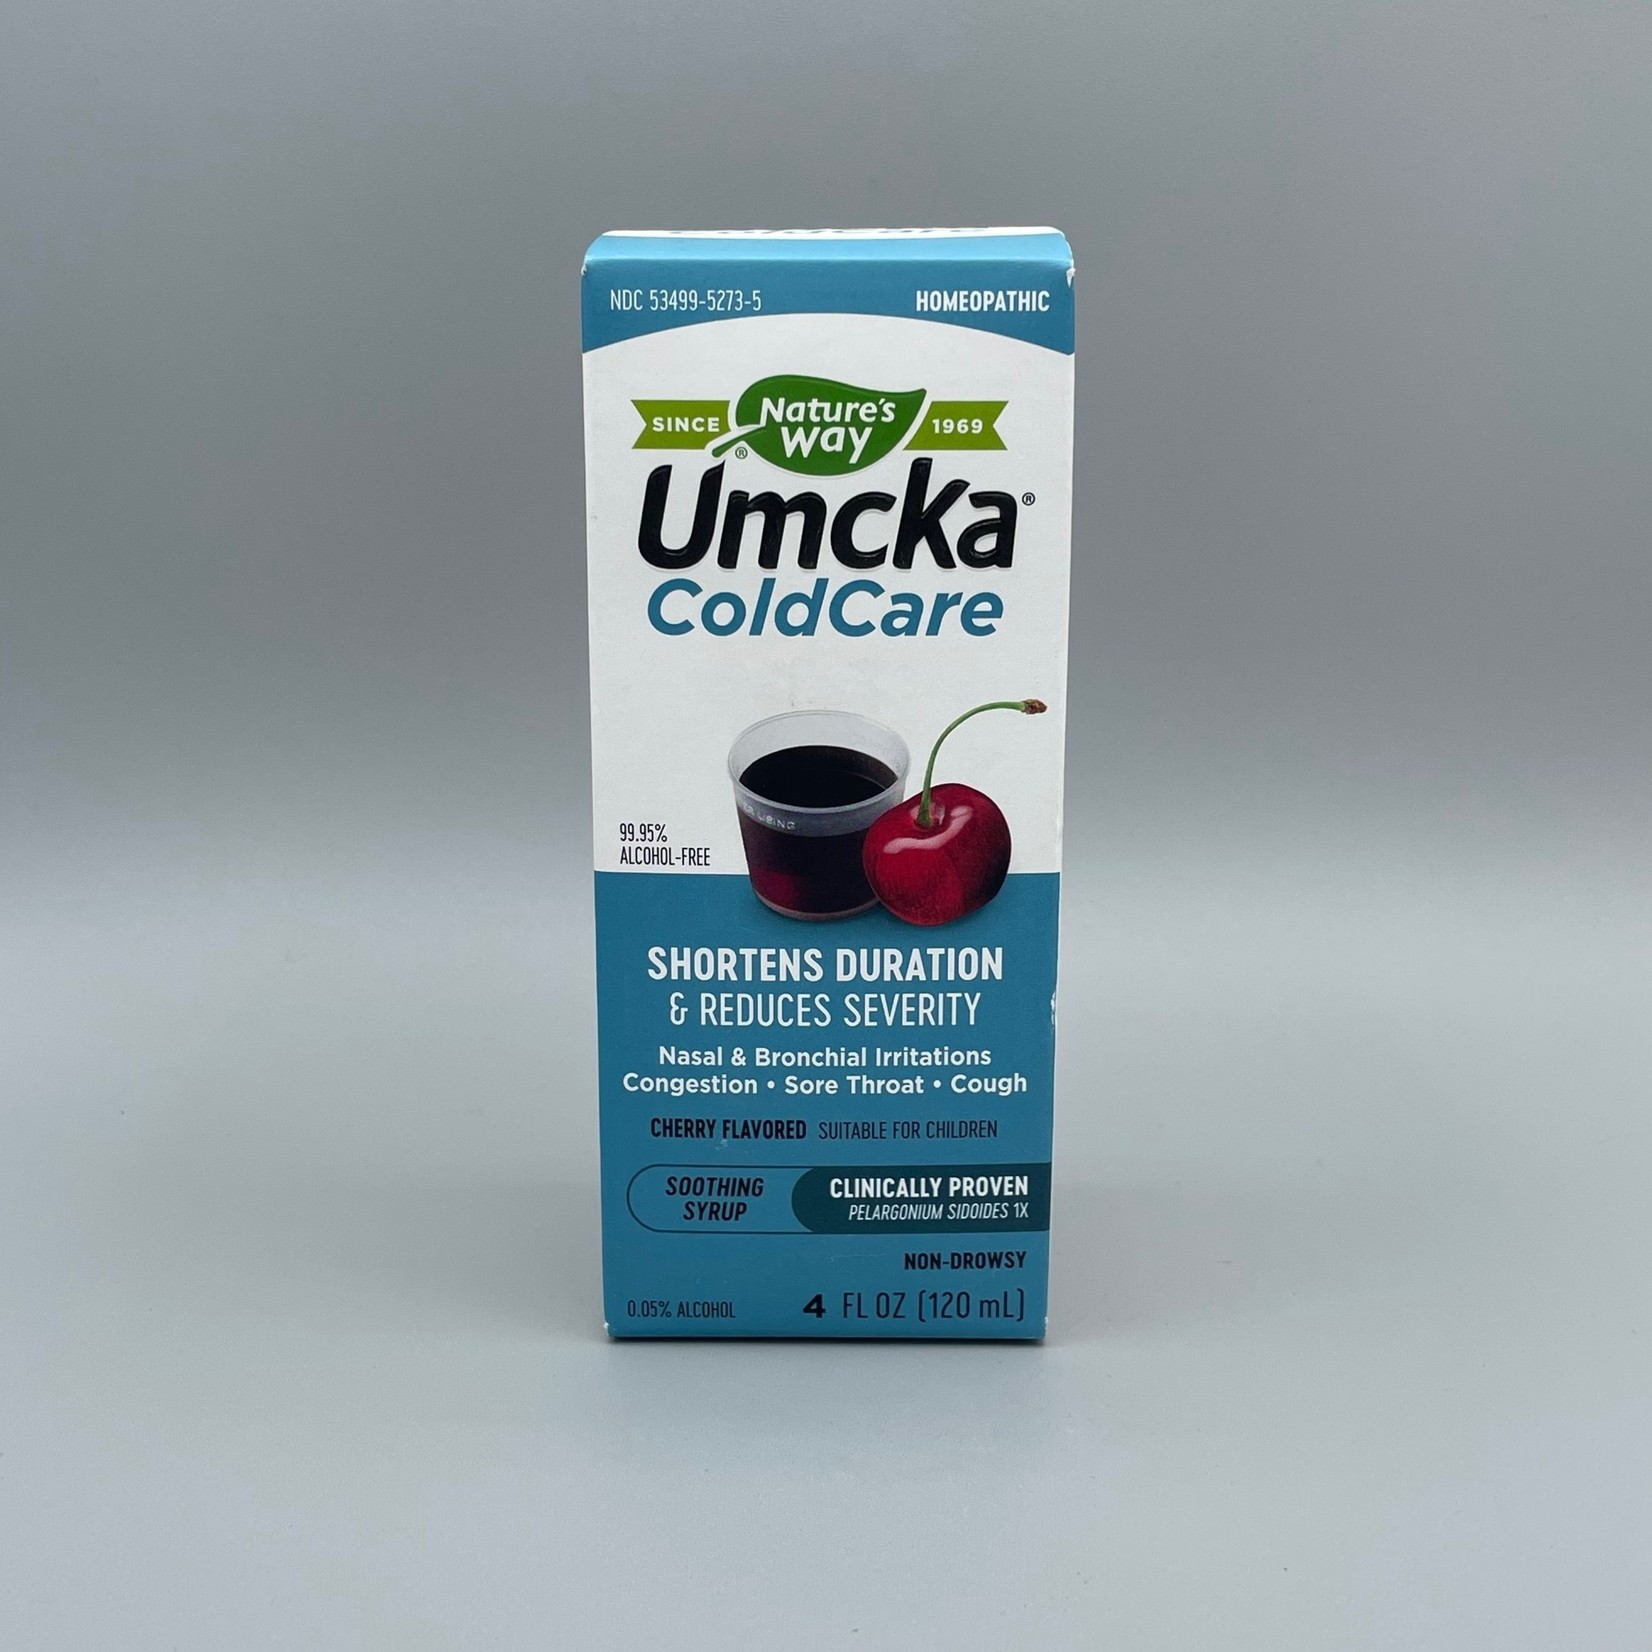 Nature's Way Nature‘s Way Umcka ColdCare Syrup (Non-Drowsy, Cherry Flavored), 4 fl oz